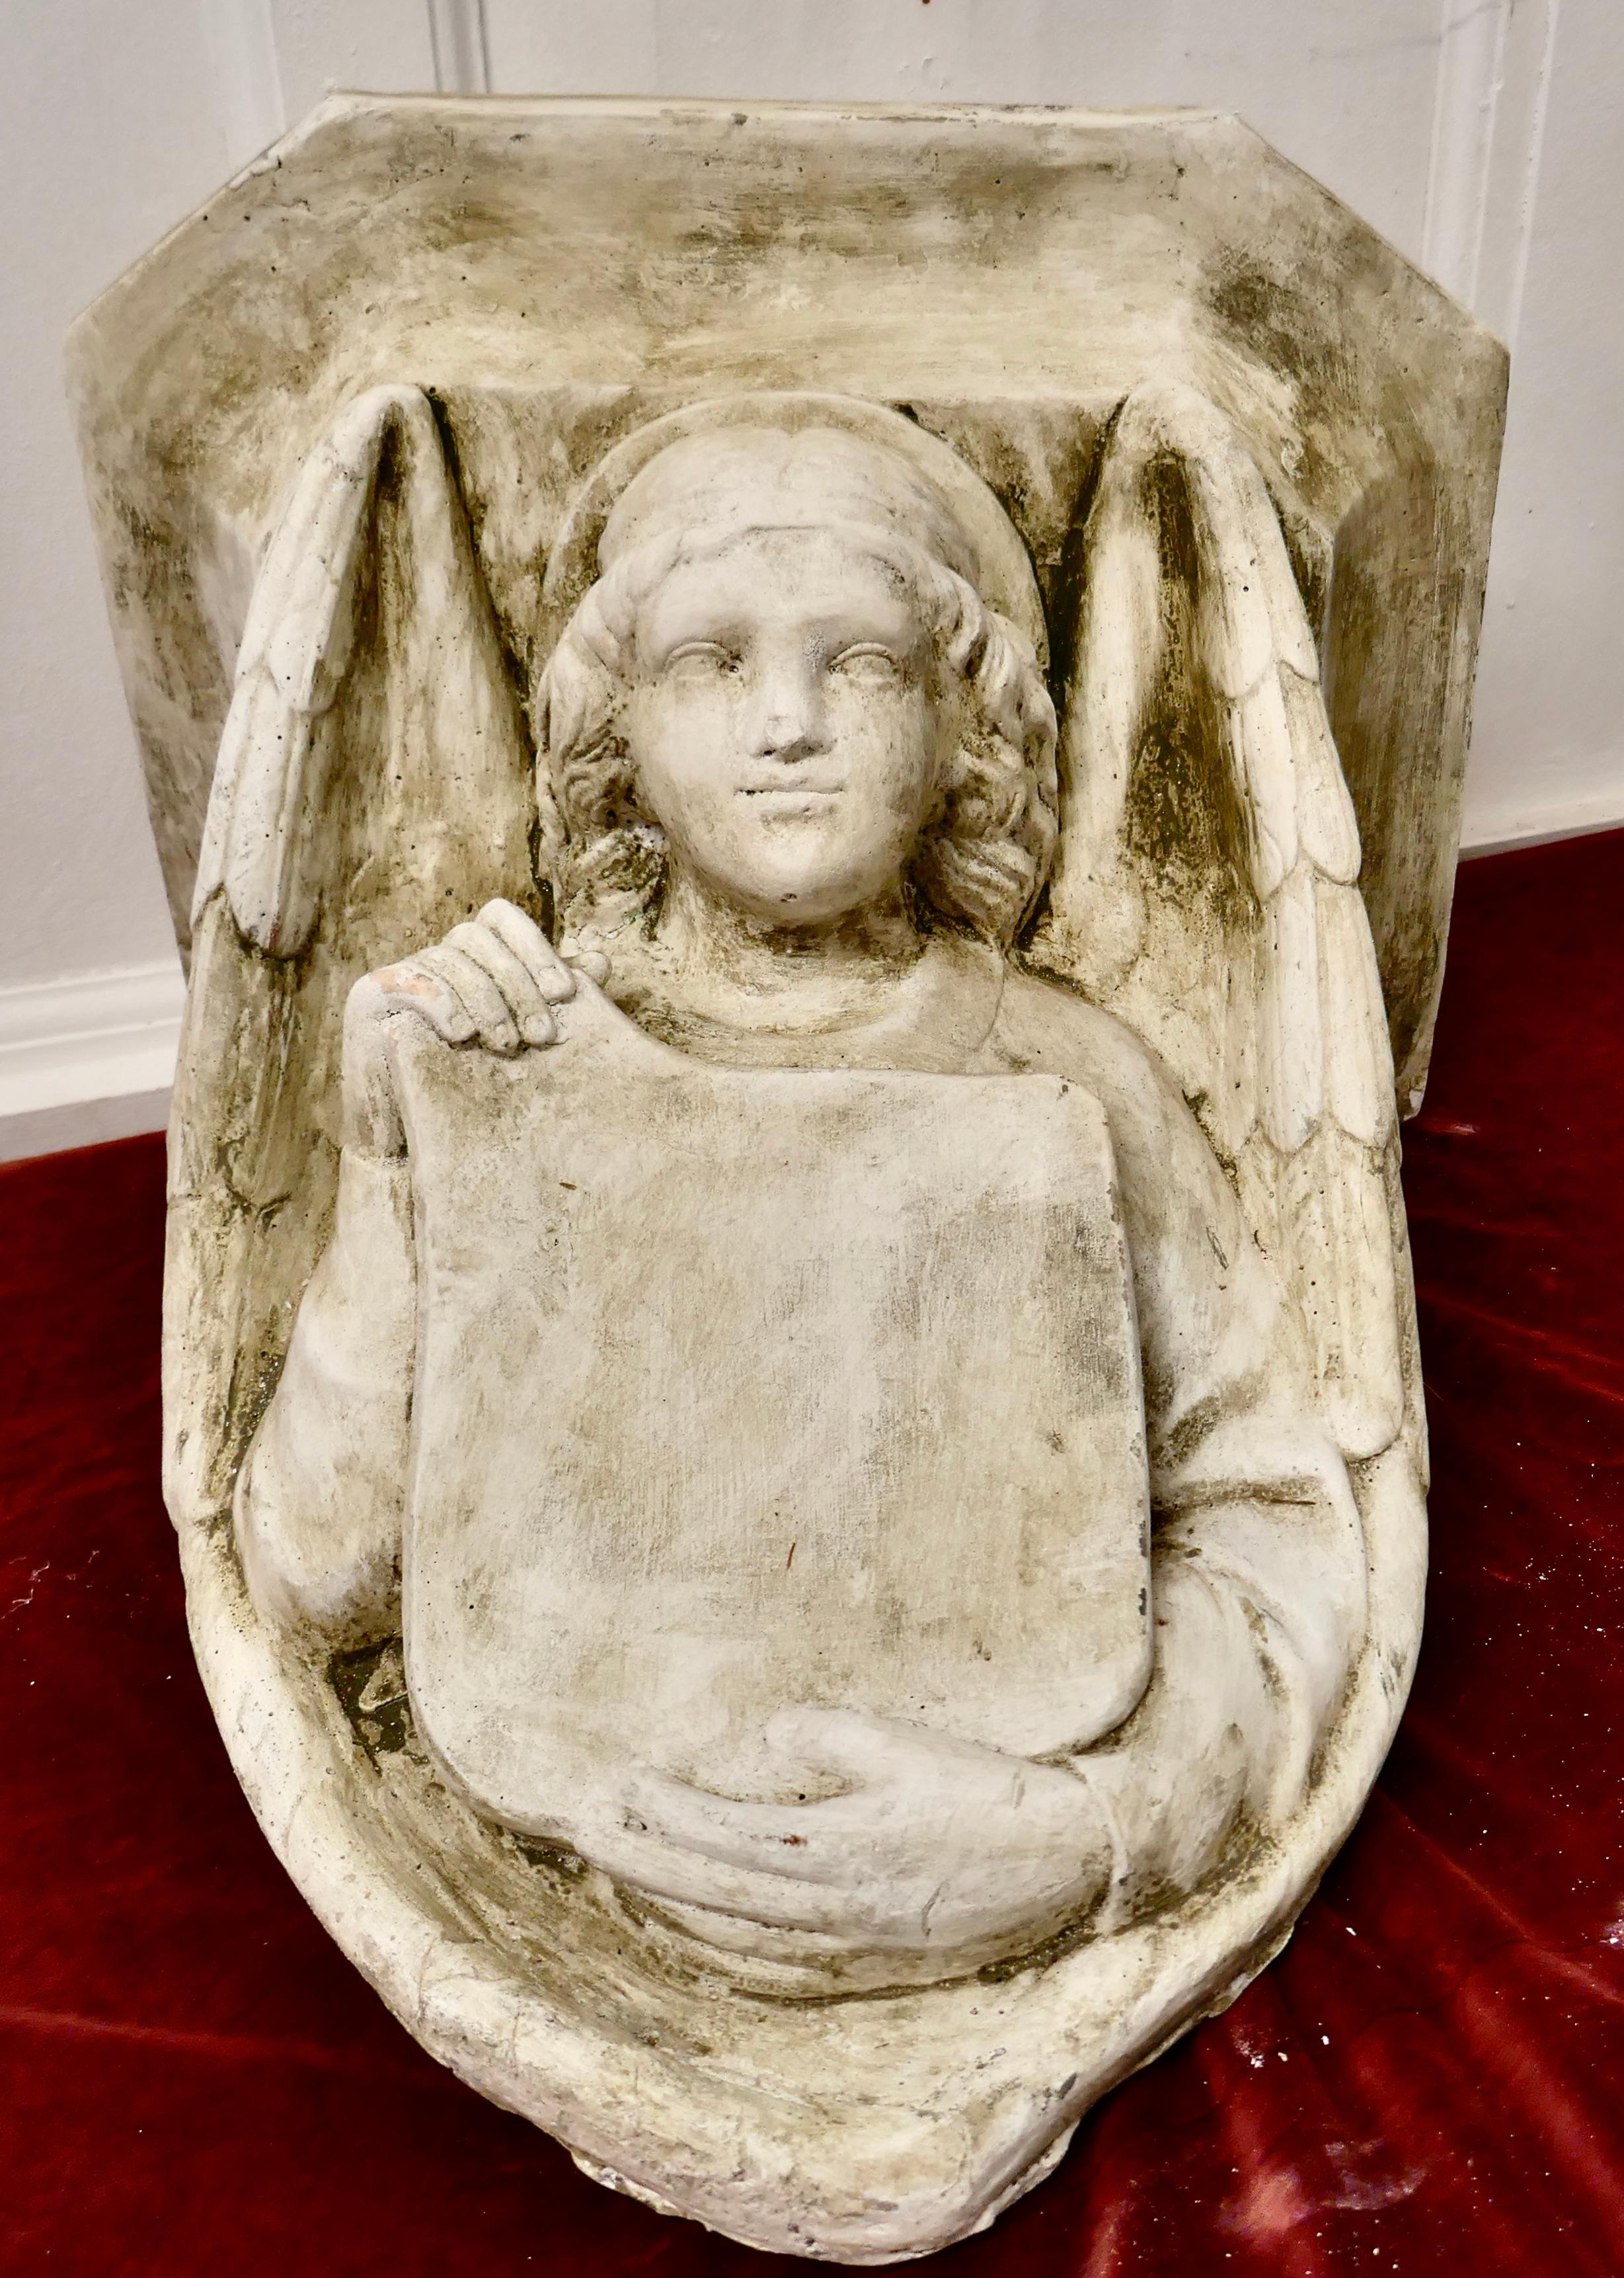 Winged angel, weathered wall bracket

This is a well weathered and heavy piece, it hangs by means of 2 loops on the back, the bracket is made in reconstituted stone with plaster like finish
It is in generally good condition with a weathered